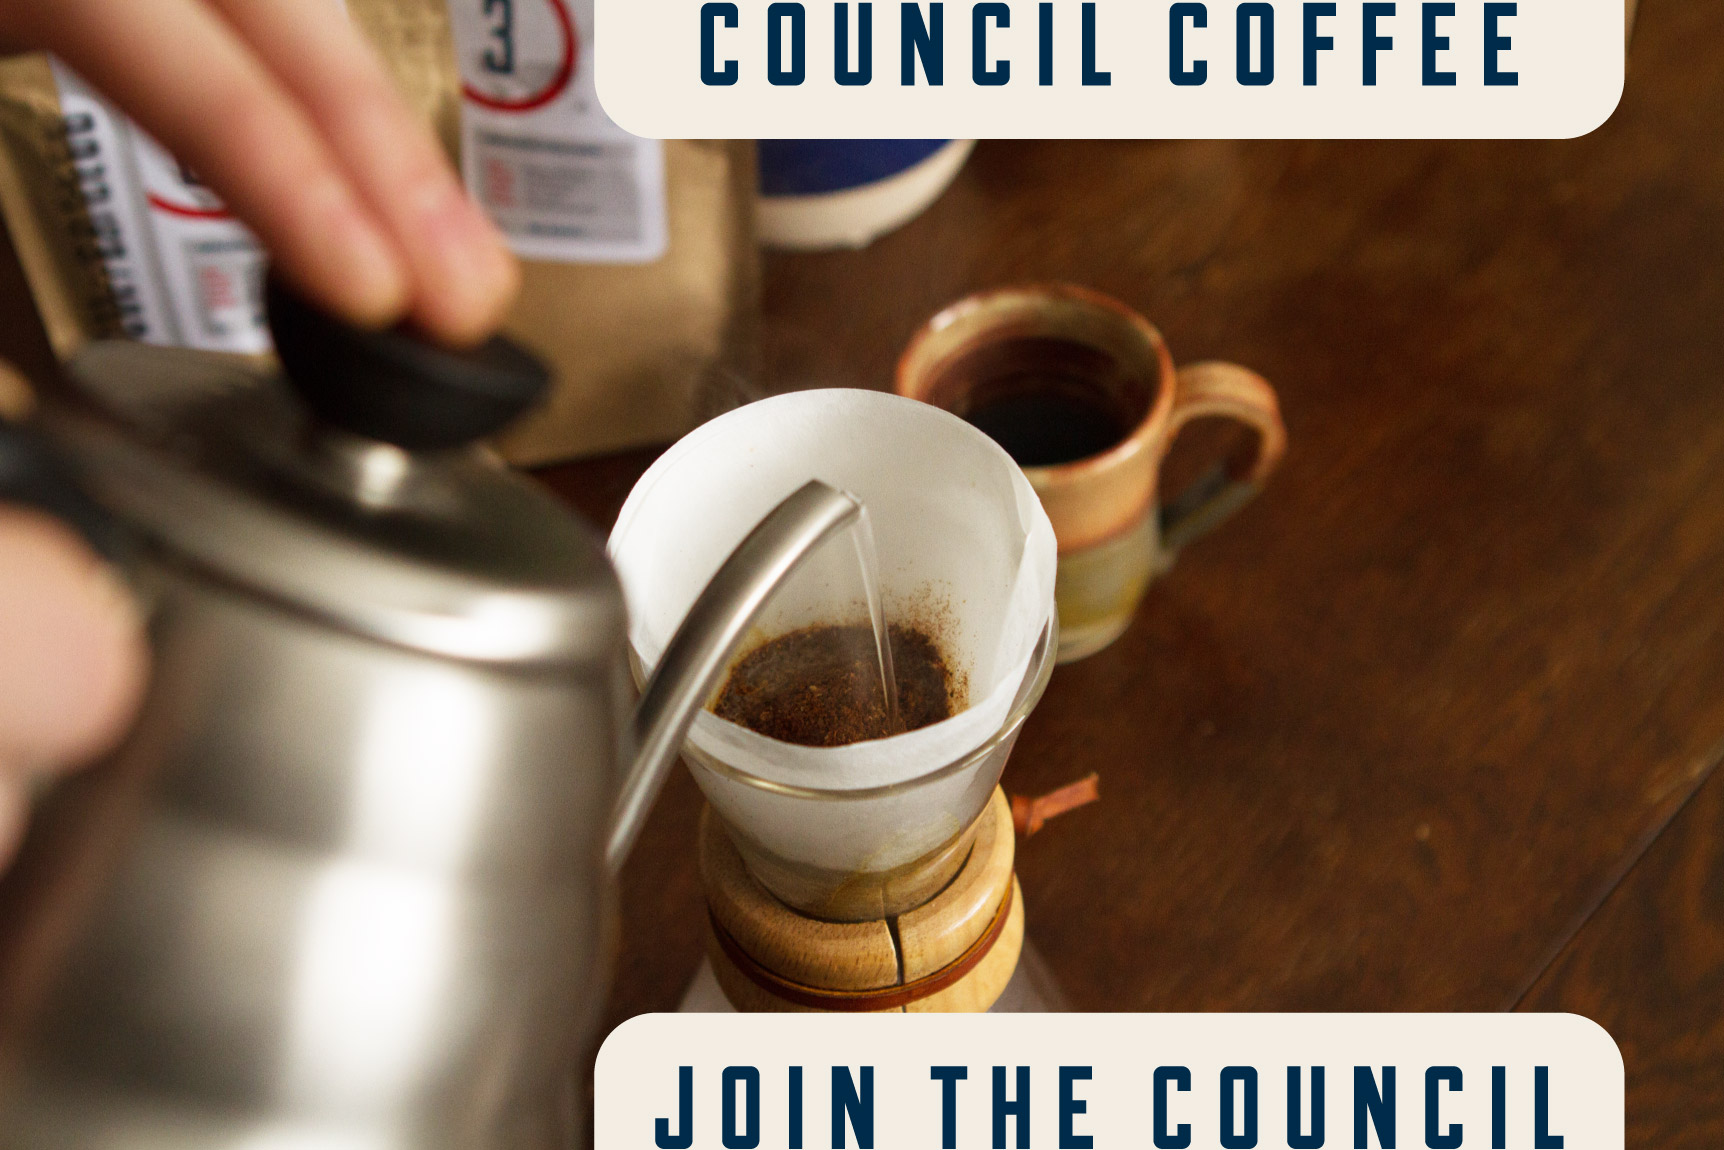 Brand name: Council Coffee, Tag line: Join the Council